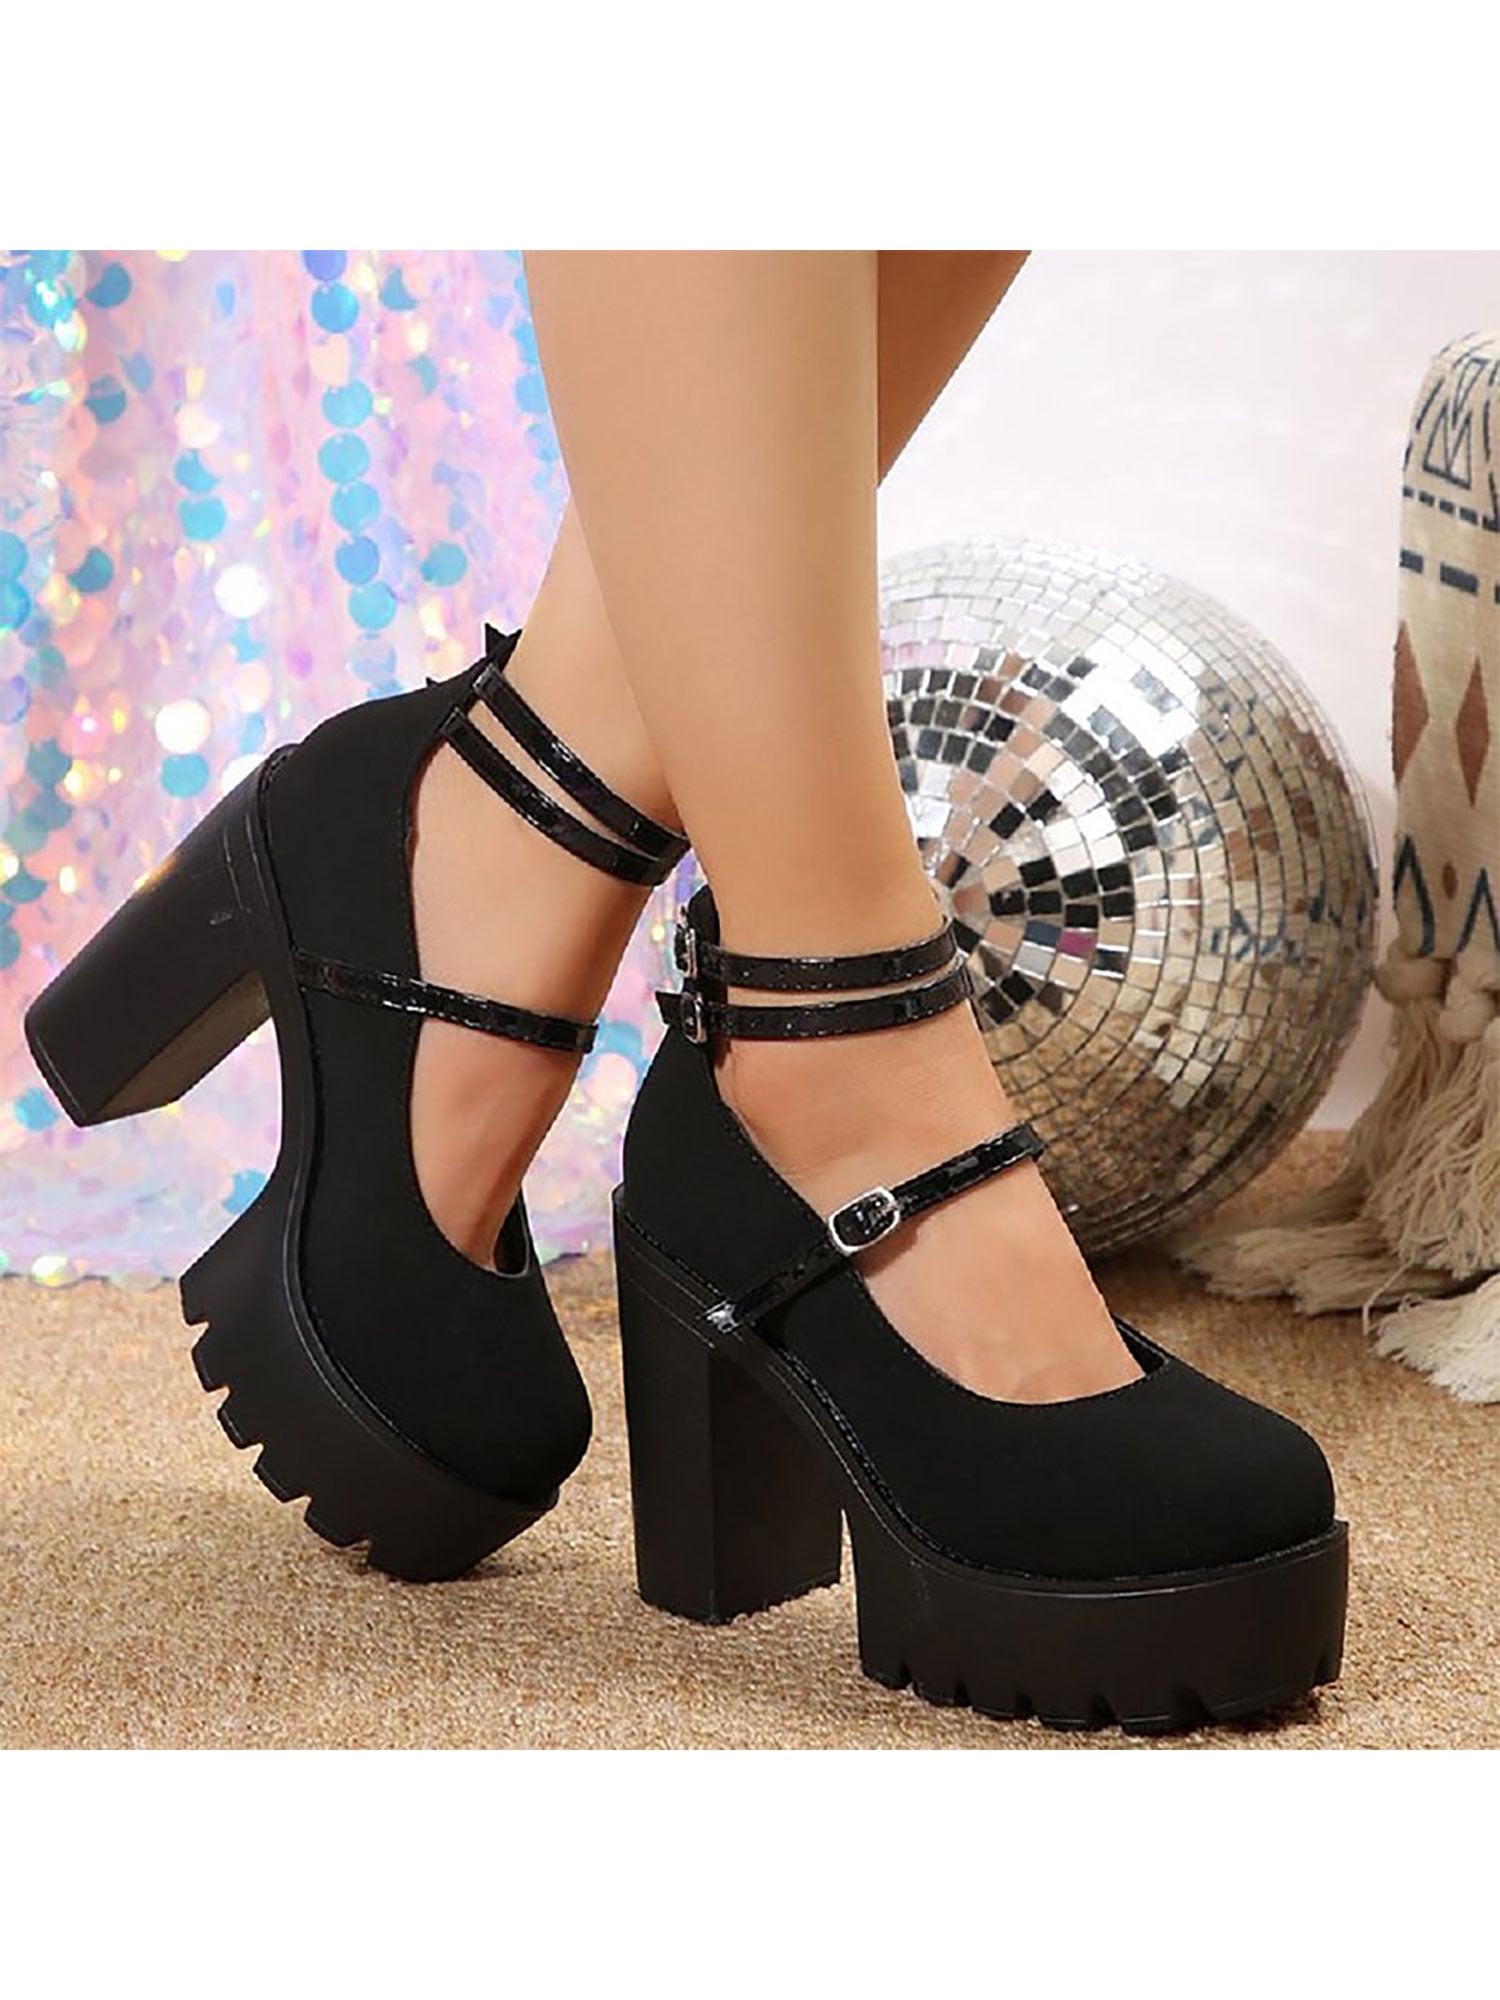 Frontwalk Ladies Pumps Ankle Strap Dress Shoes Chunky Block Heel Formal ...